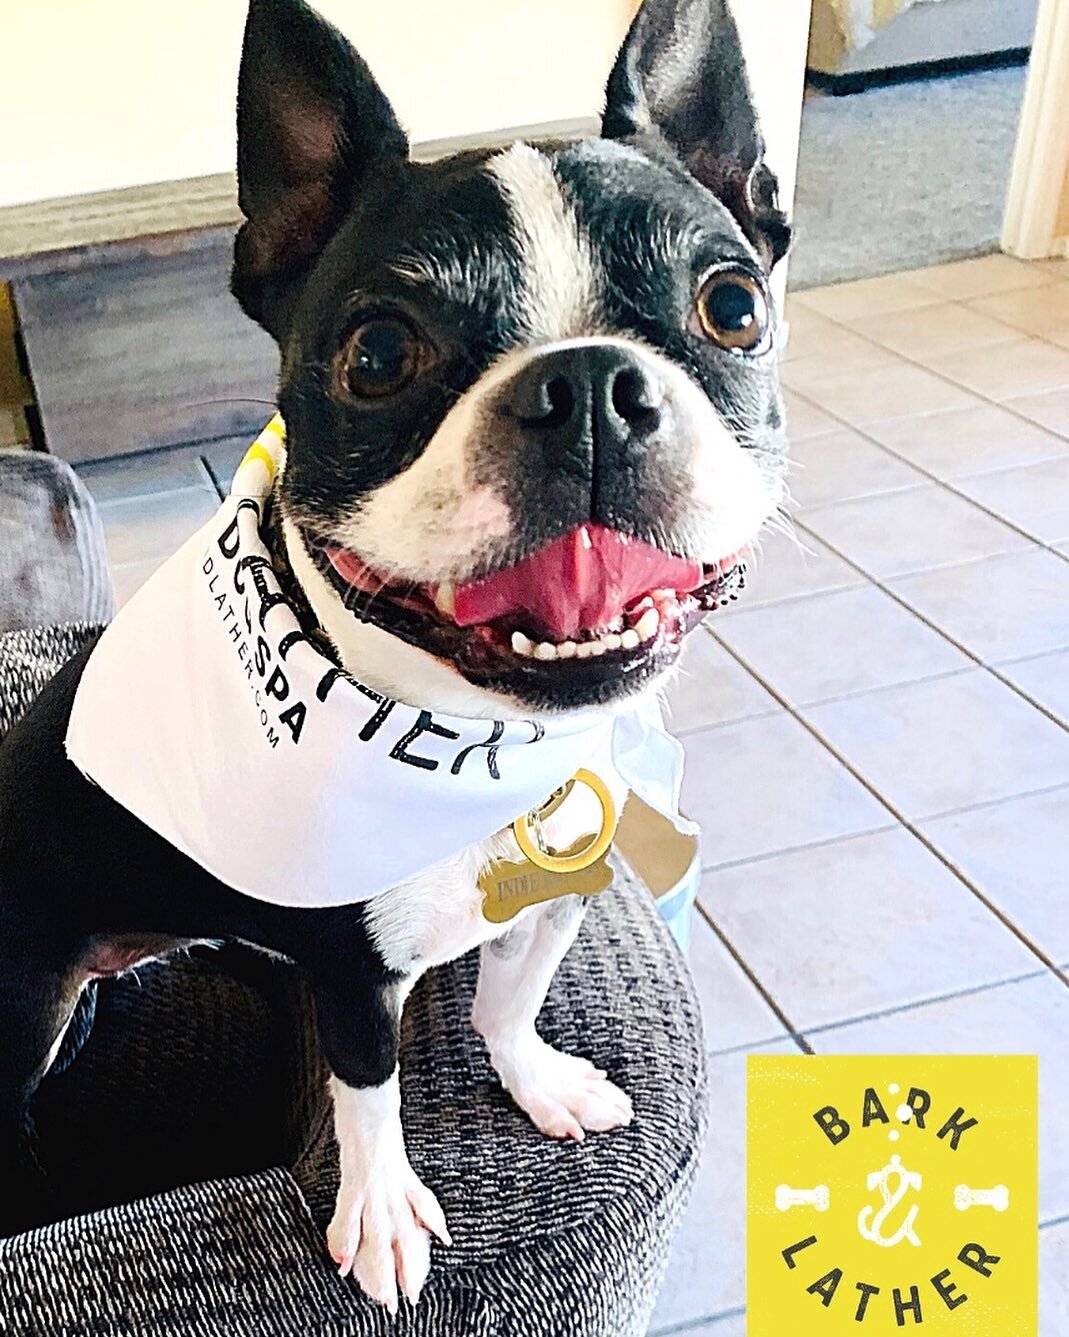 Meet Indie, one of this month&rsquo;s happy Bark &amp; Lather pups! 🐾 ⁣
Indie&rsquo;s human, Jon, said &ldquo;The happiest I&rsquo;ve EVER seen my Indie girl was after her special treatment at Bark &amp; Lather. She never smiles THIS much!&rdquo; ⁣
